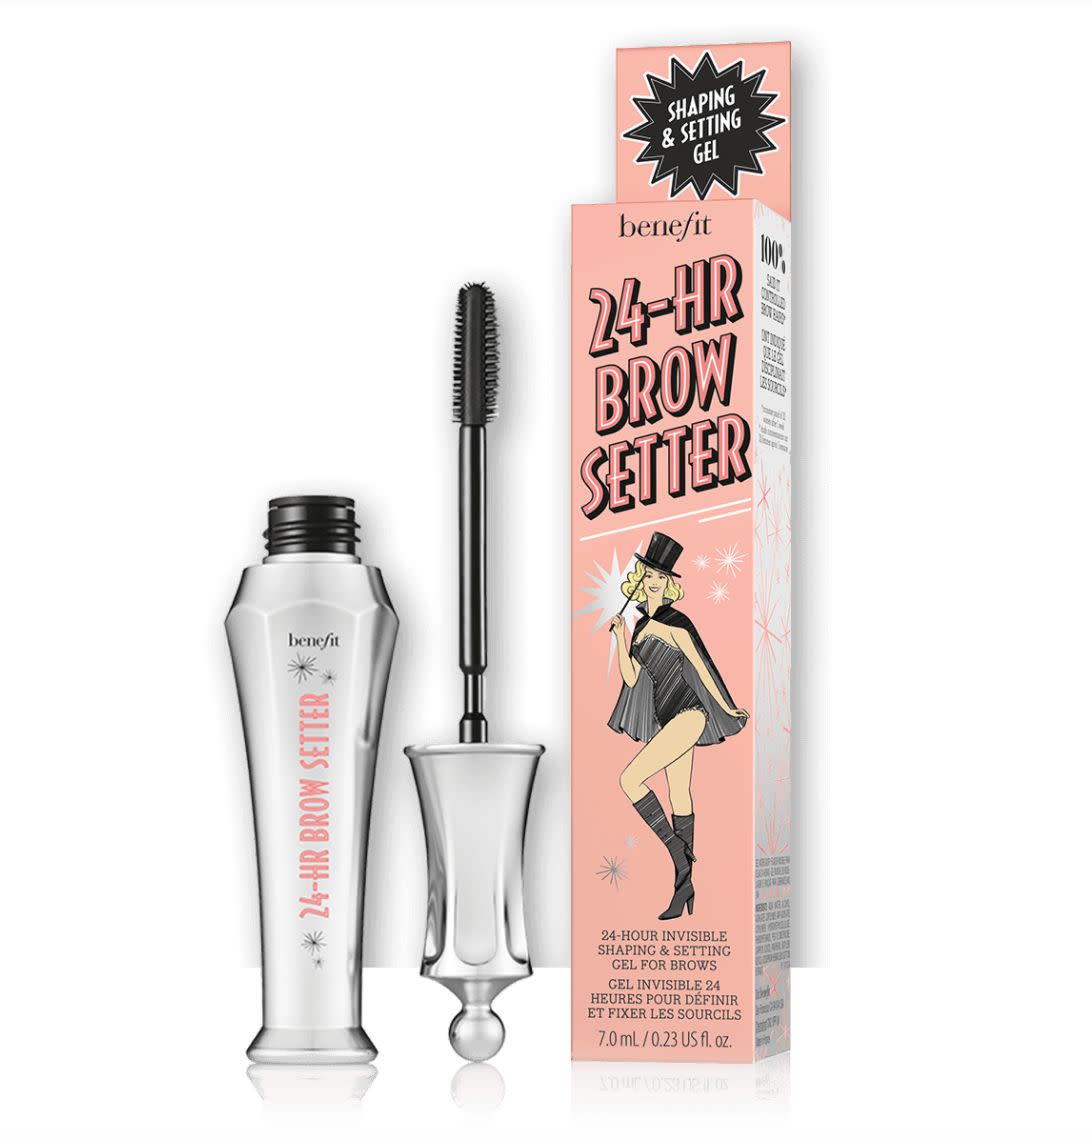 Find this <a href="https://fave.co/3cmv7zK" target="_blank" rel="noopener noreferrer">Benefit 24-Hour Brow Setter</a> for $24 at <a href="https://fave.co/3cmv7zK" target="_blank" rel="noopener noreferrer">Benefit Cosmetics.</a>